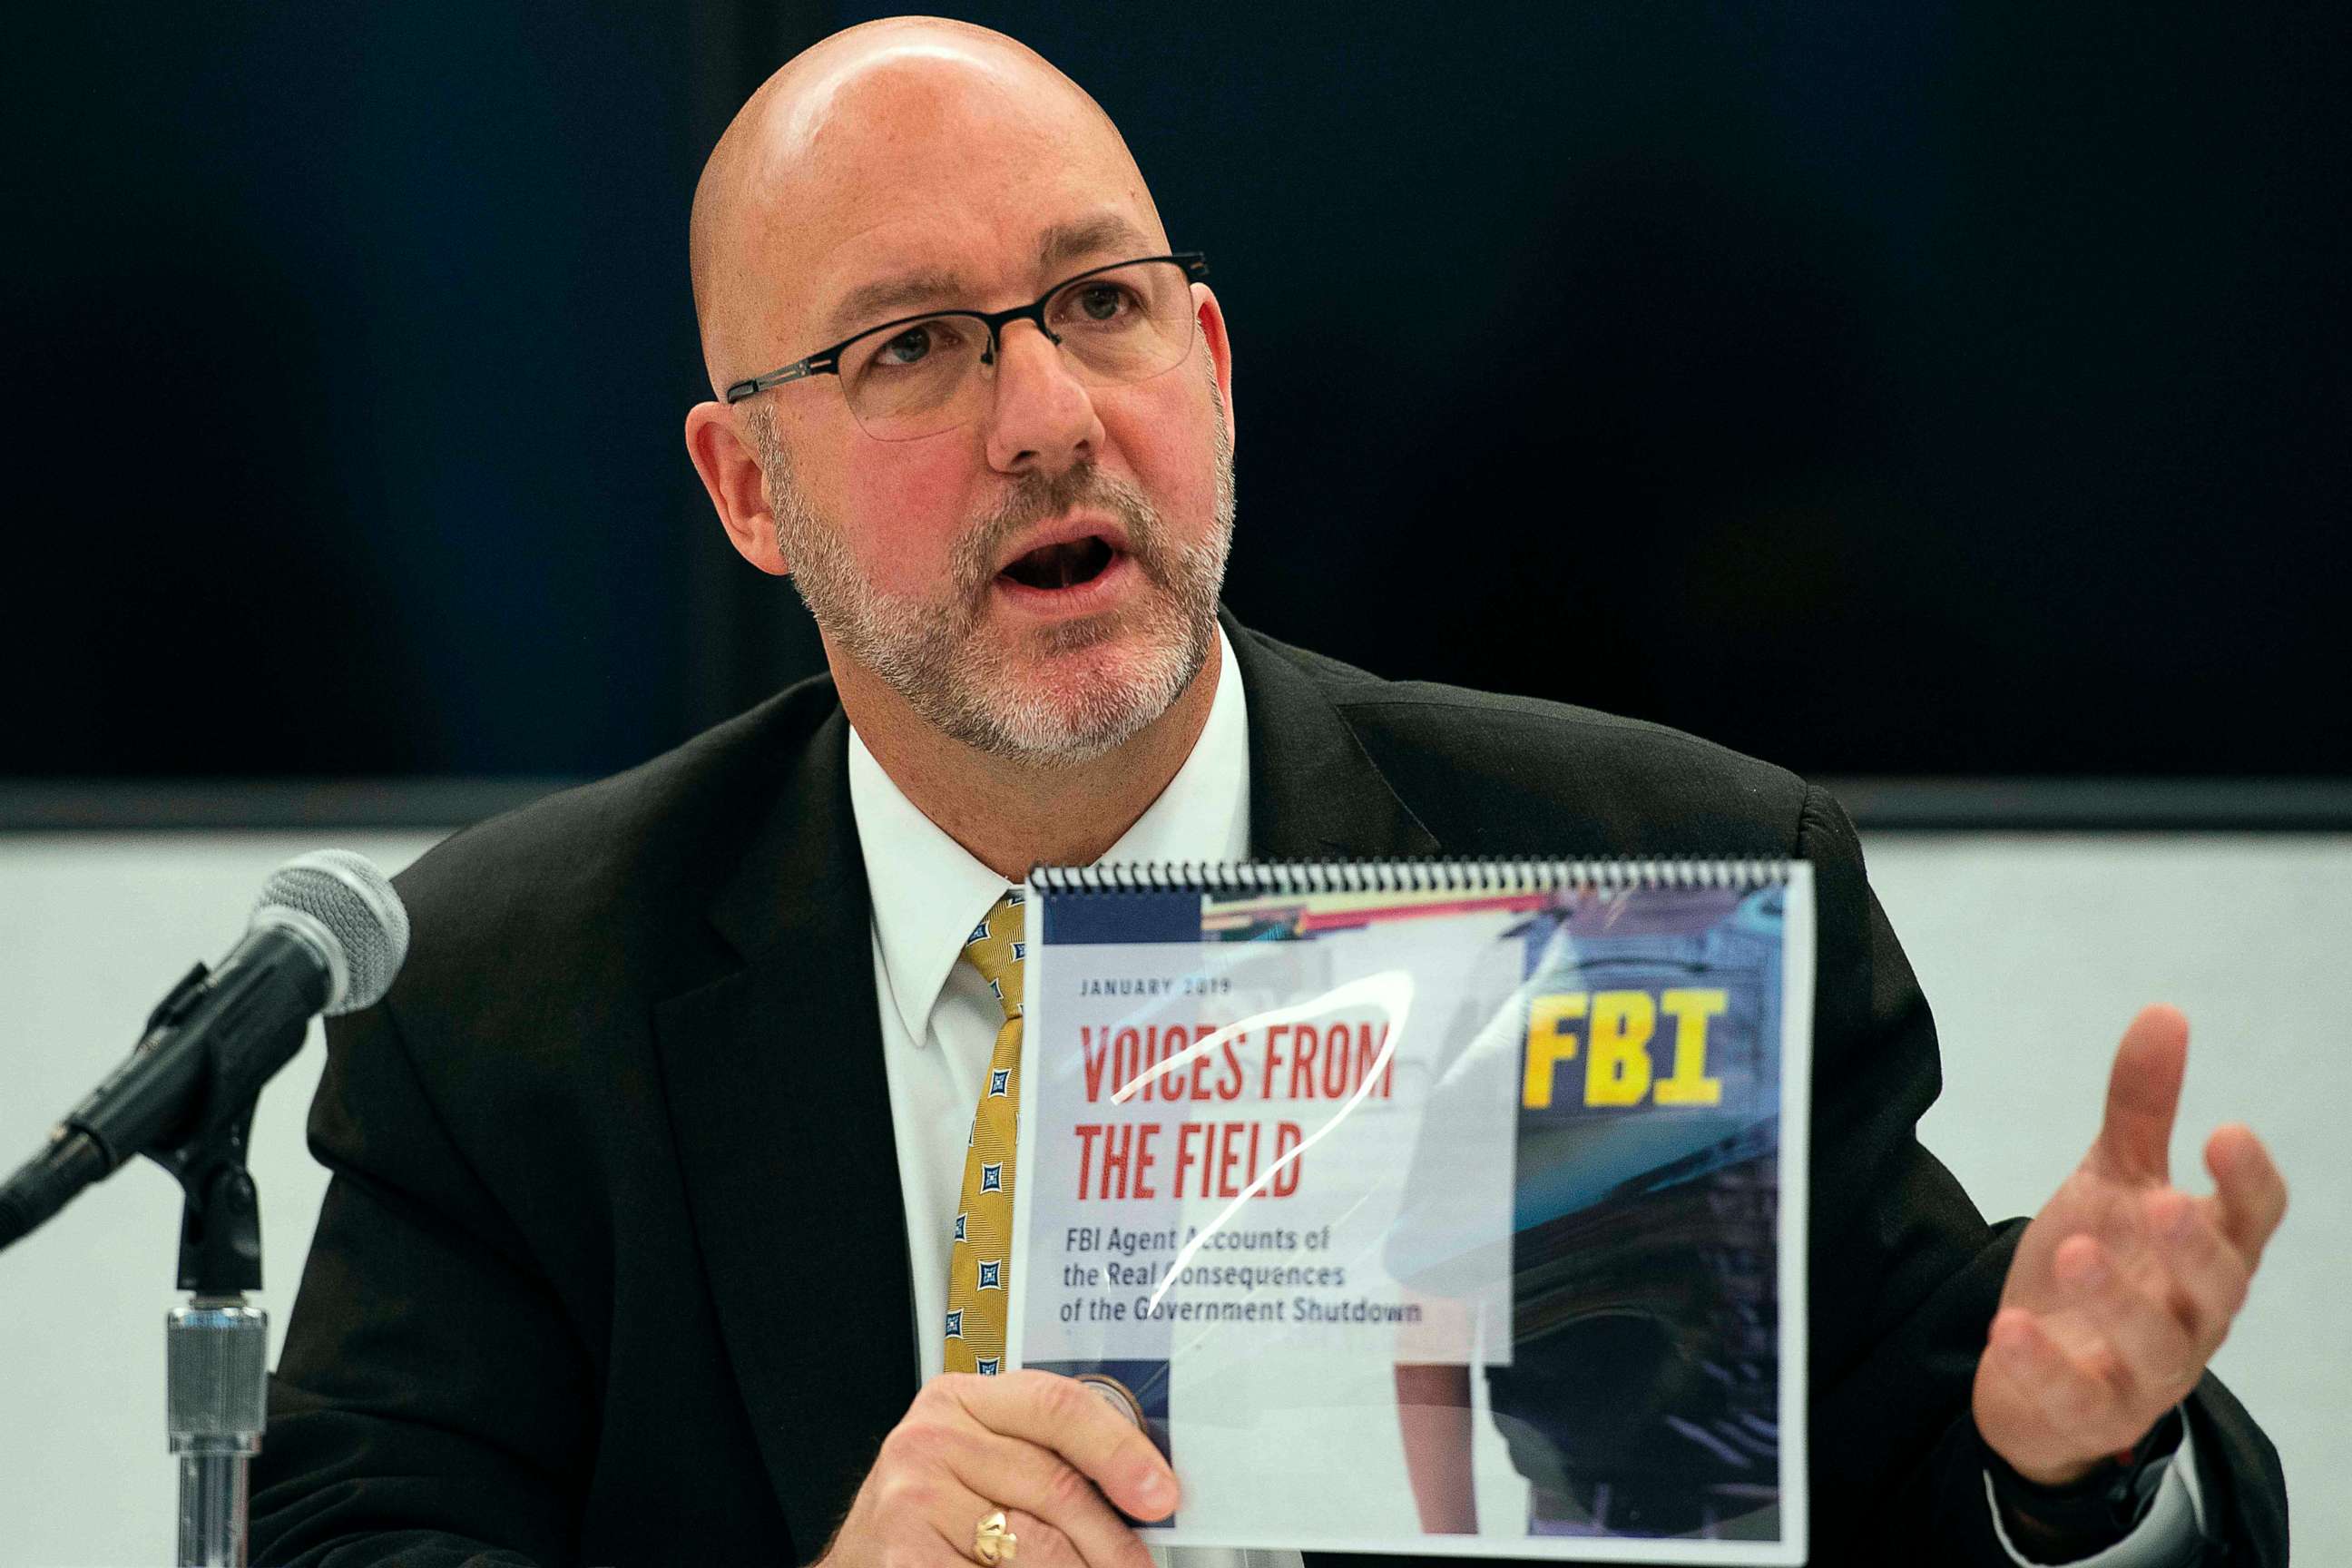 PHOTO: Thomas O'Connor holds up an FBI report "Voices From the Field" giving examples of how the government shutdown is undermining their work on drug and gang enforcement during a press conference in Washington, DC, Jan. 22, 2019.